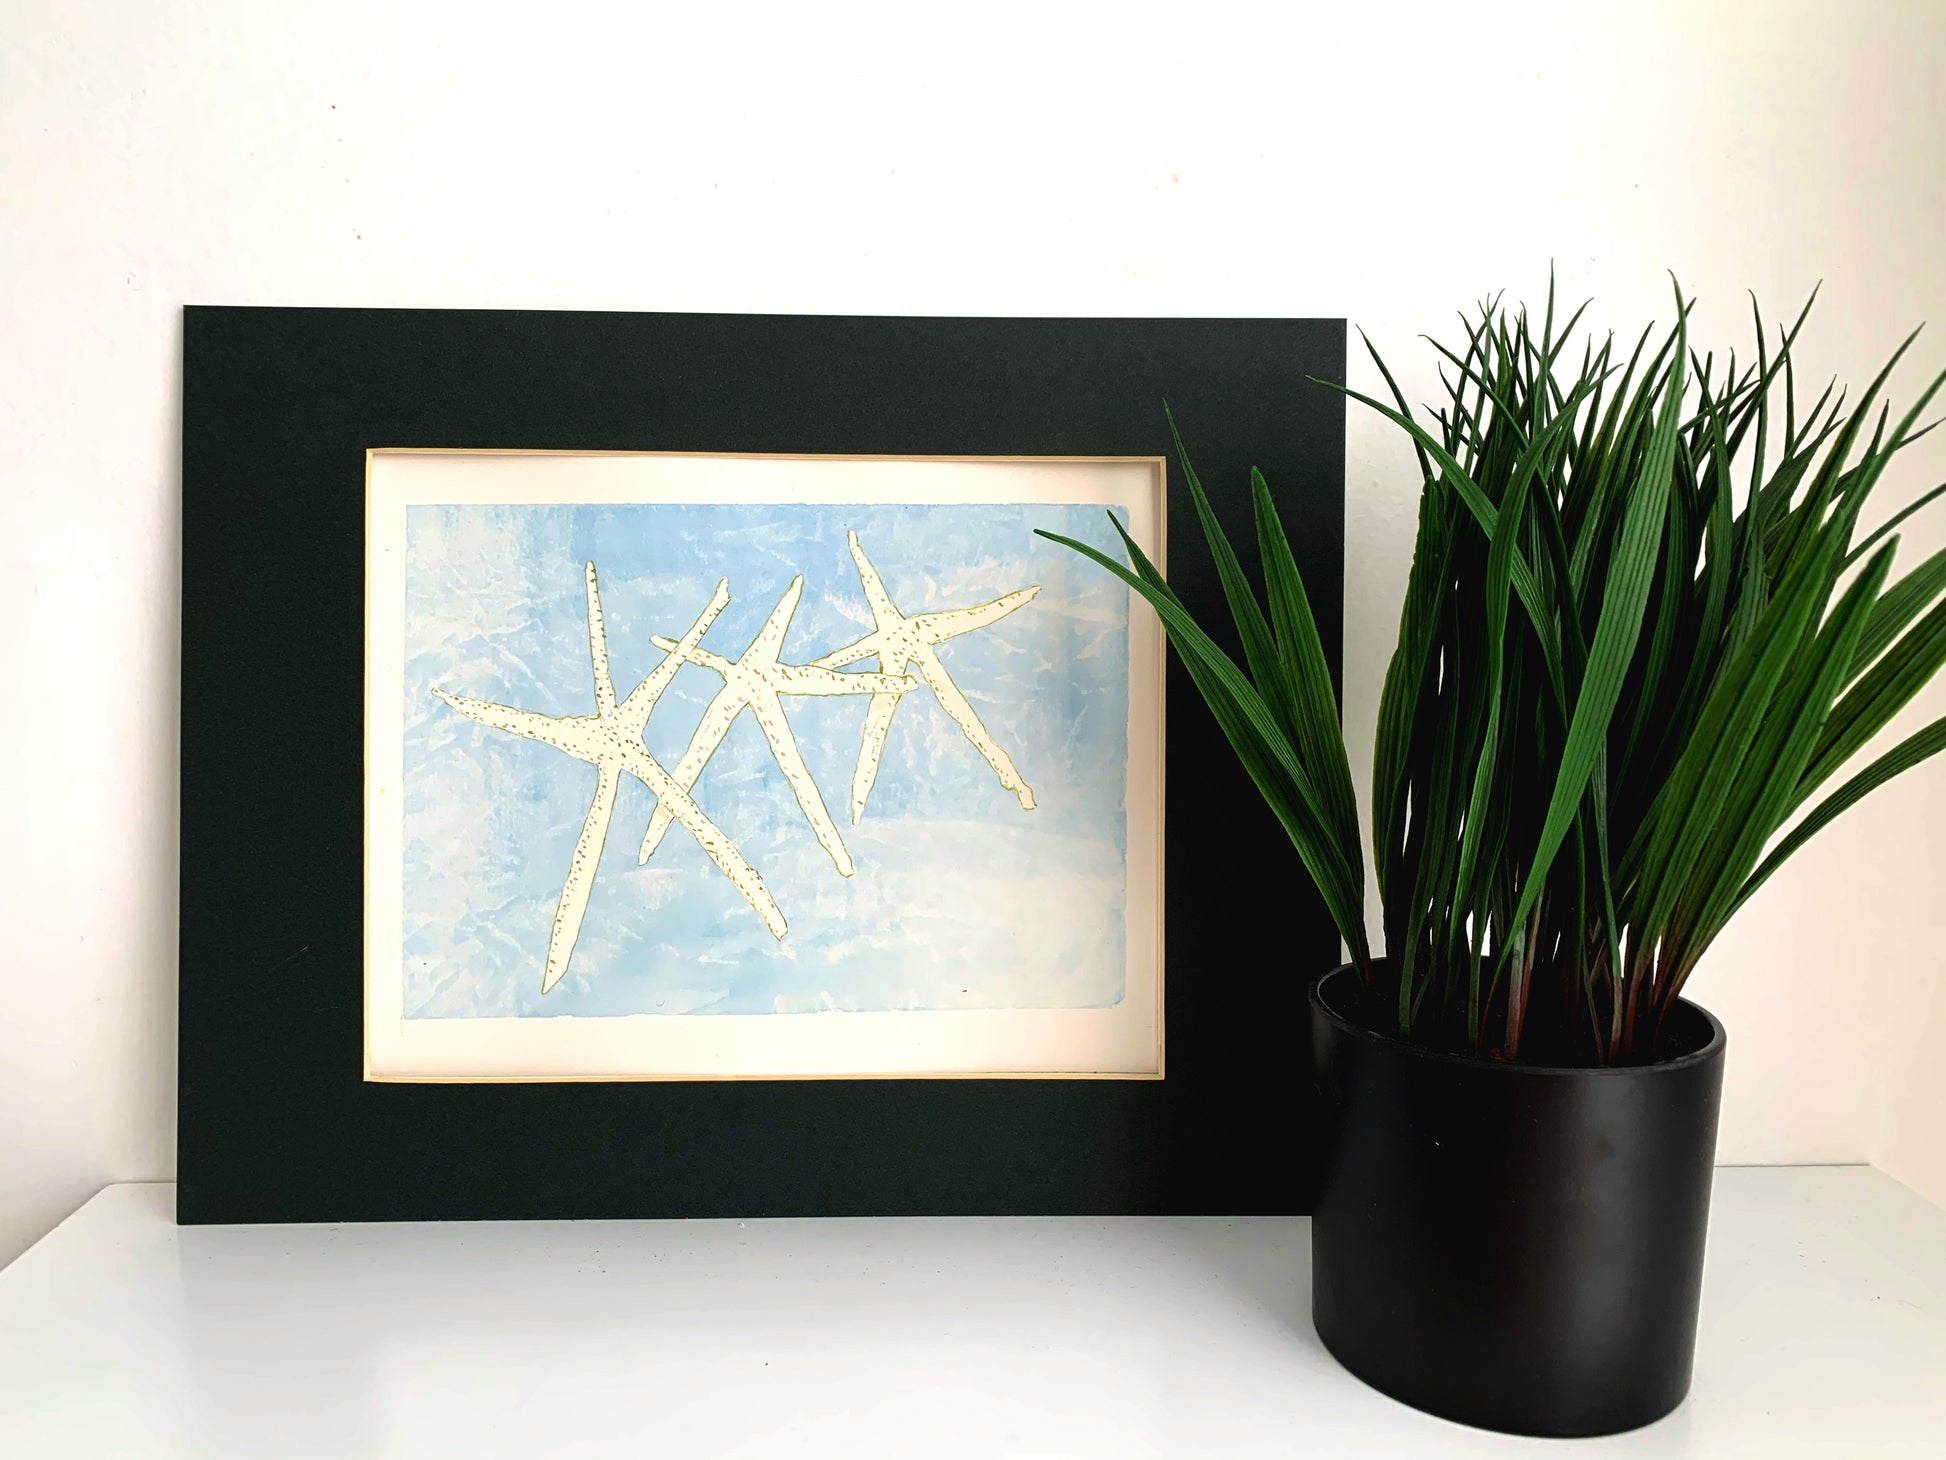 Group of Starfish Watercolor Print Art - Flamingo Shores - Original Art for Home Decor and Gifts